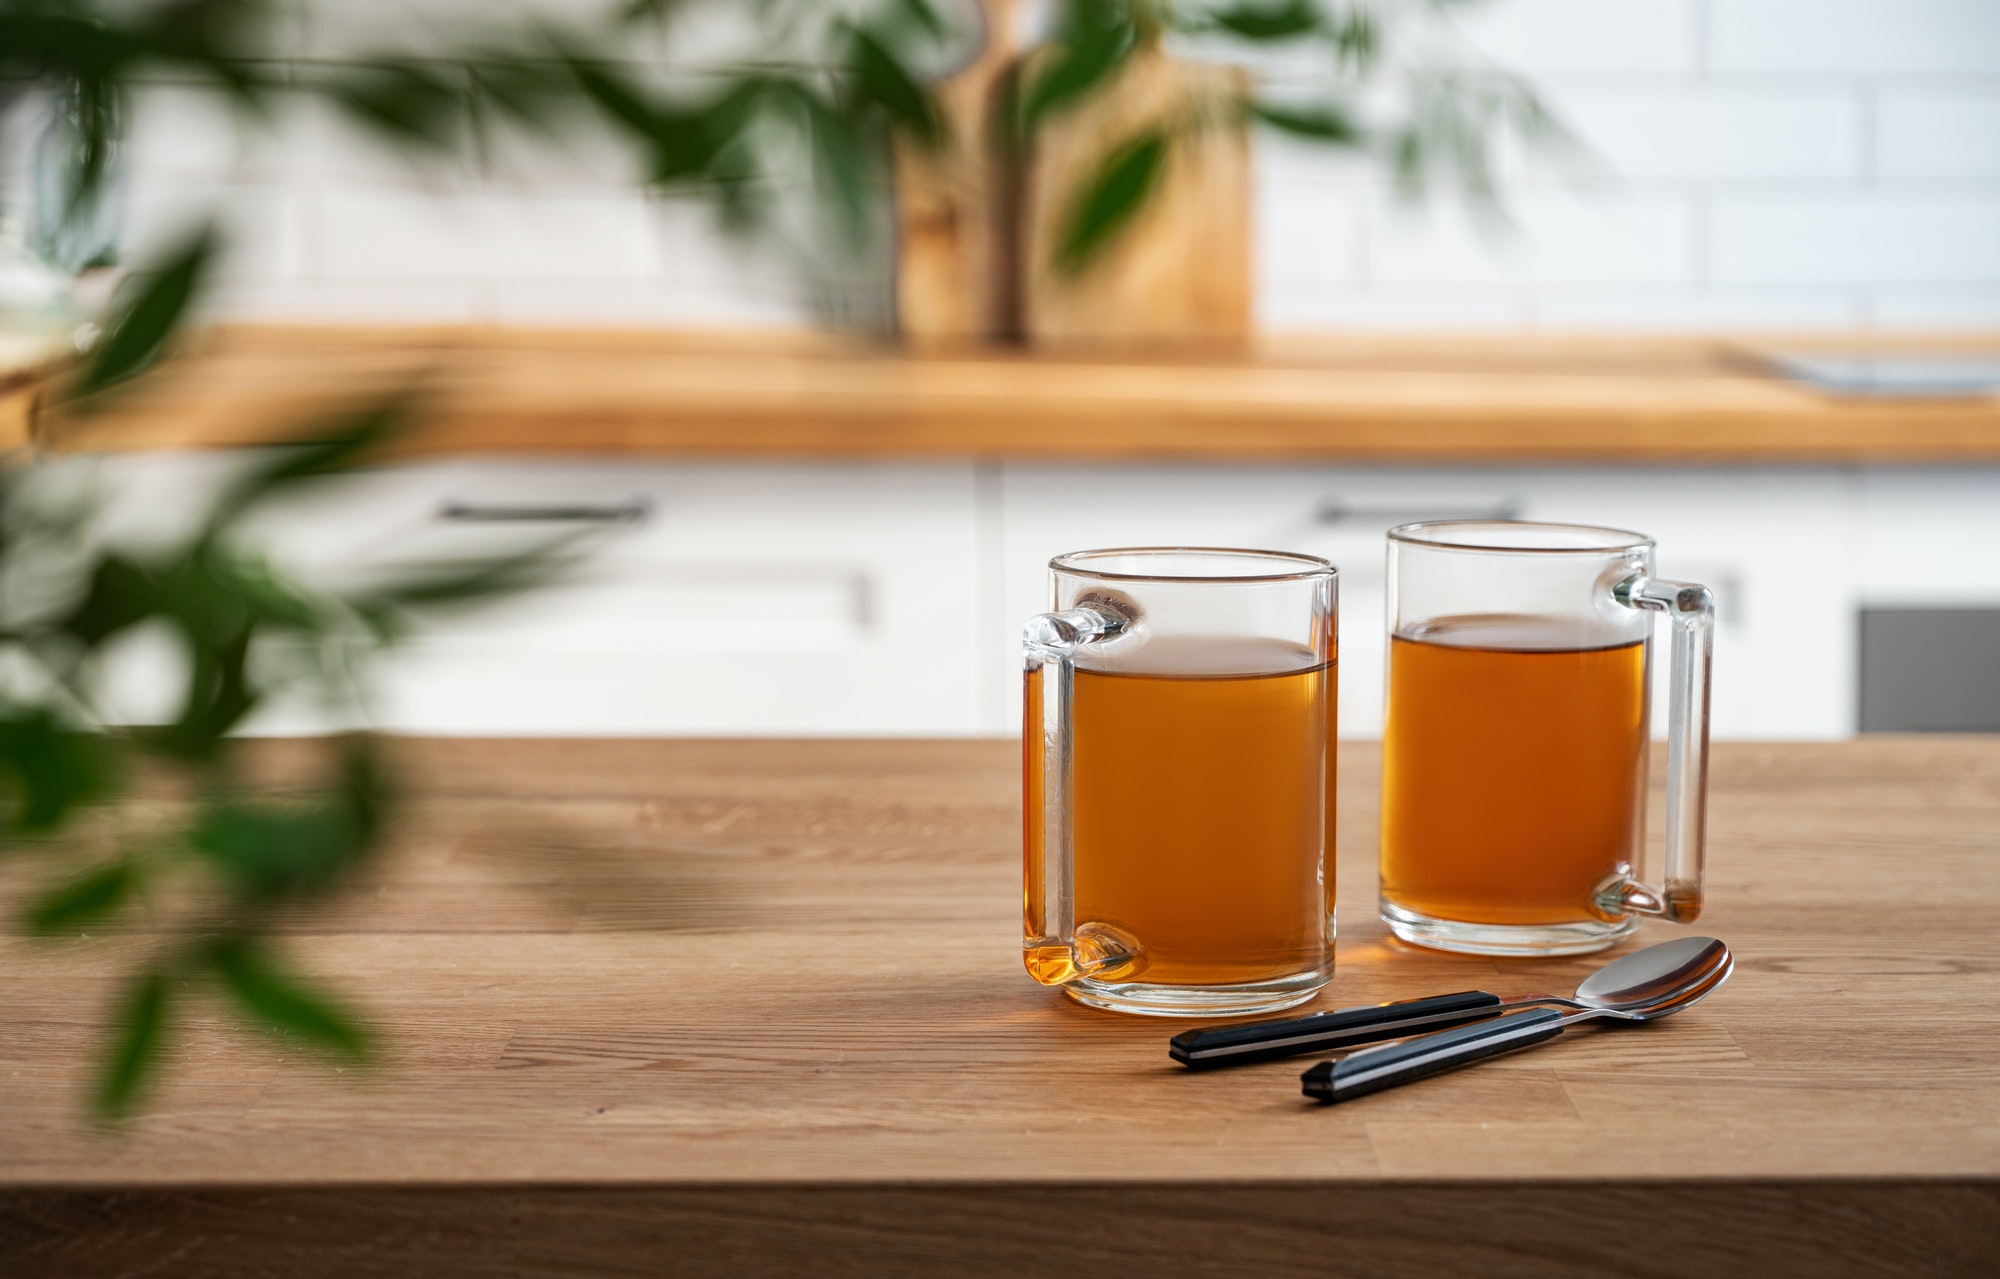 Two cups of tea and brunch close up on wooden countertop against the background of a white kitchen